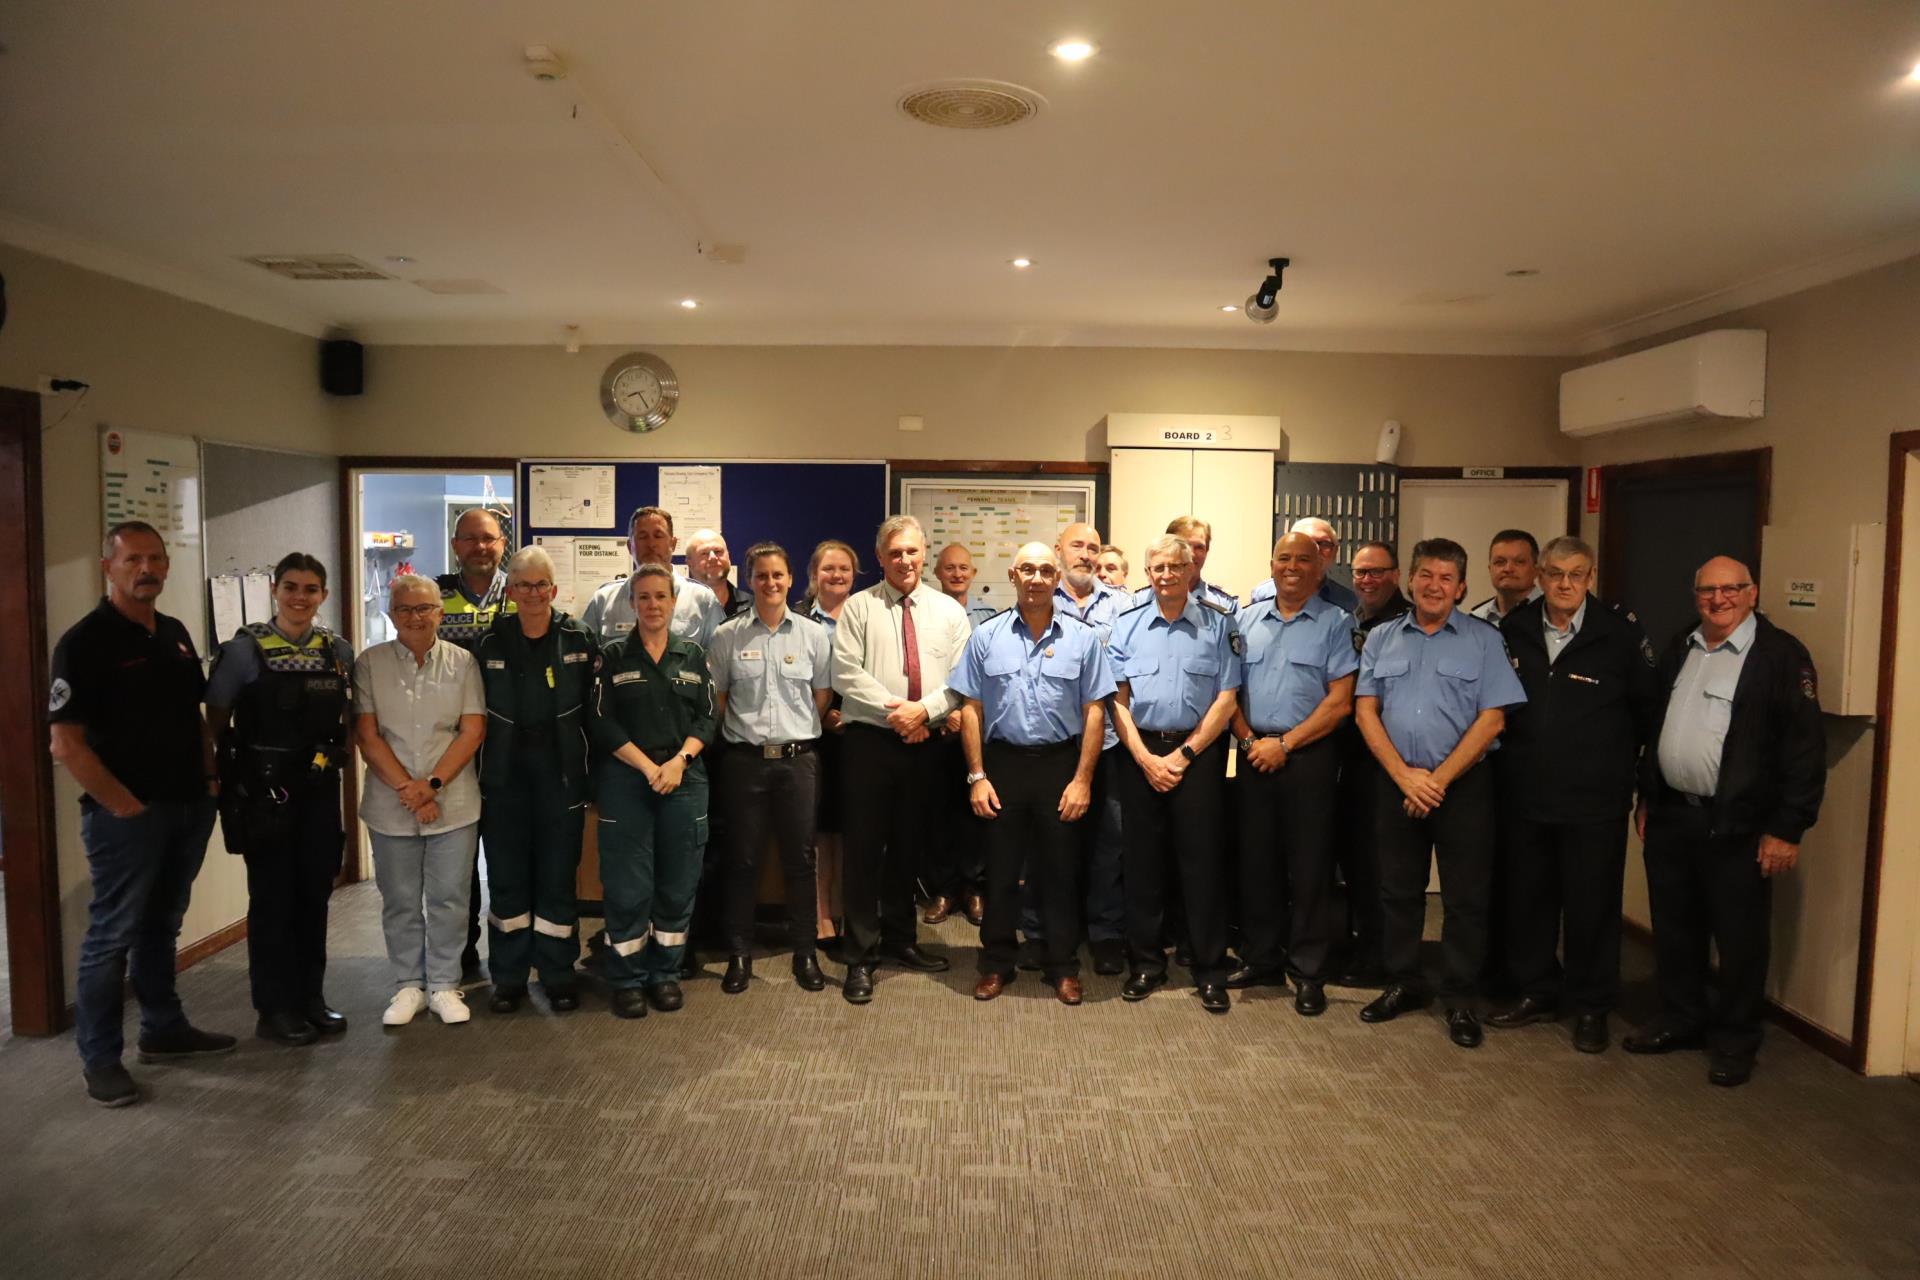 Shire of Waroona to Host Emergency Services Recognition and Thank You